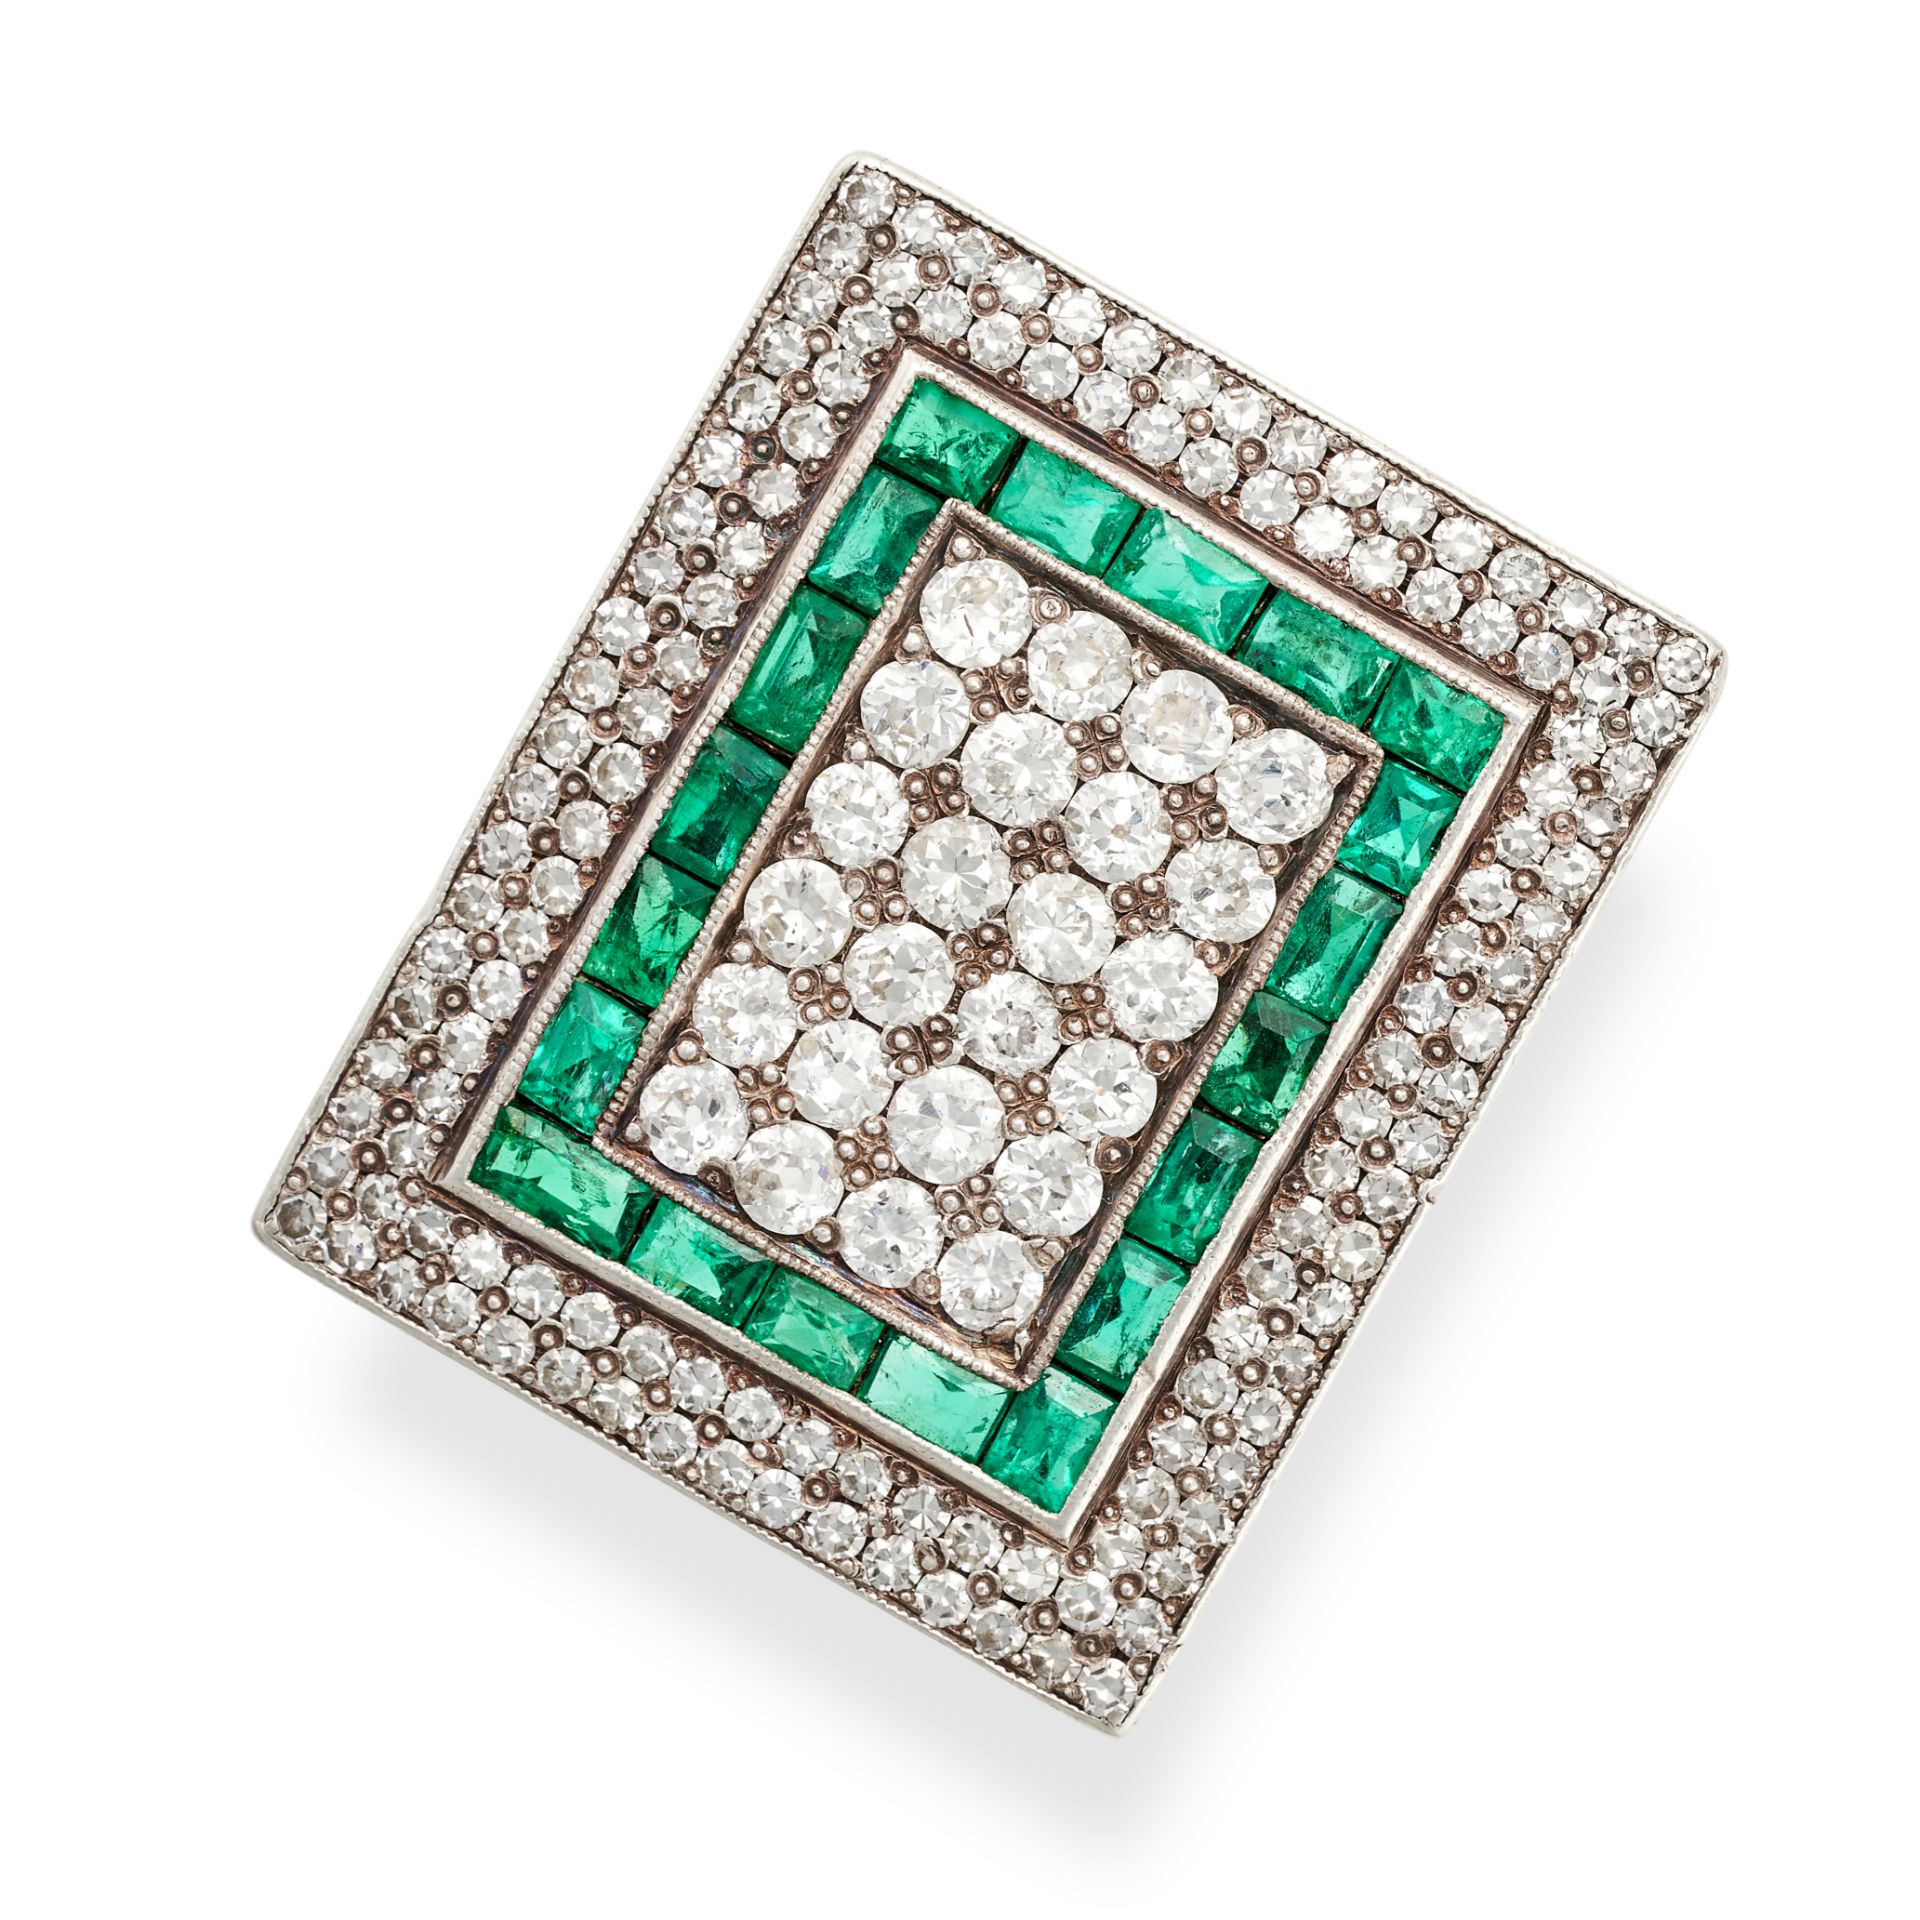 TIFFANY & CO., AN ART DECO EMERALD AND DIAMOND DRESS RING in 18ct yellow gold, the rectangular fa...